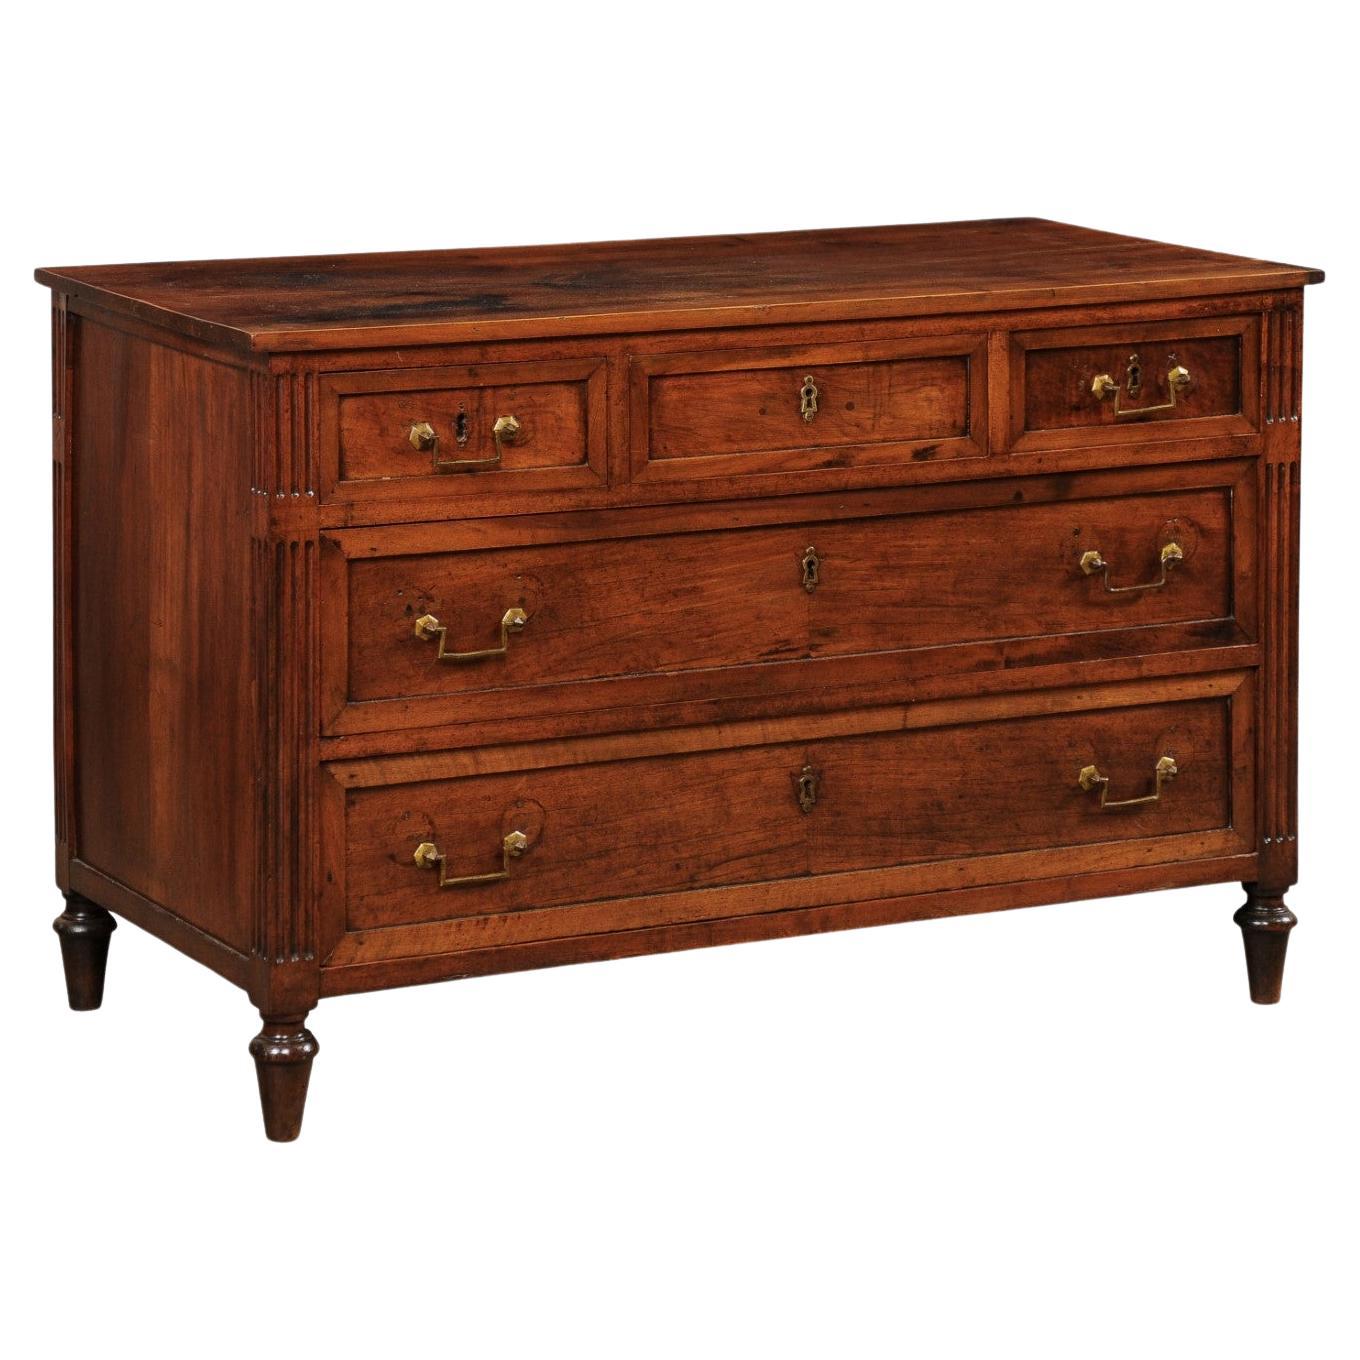 French Neoclassic Walnut Commode with Brass Hardware, Mid 19th C.